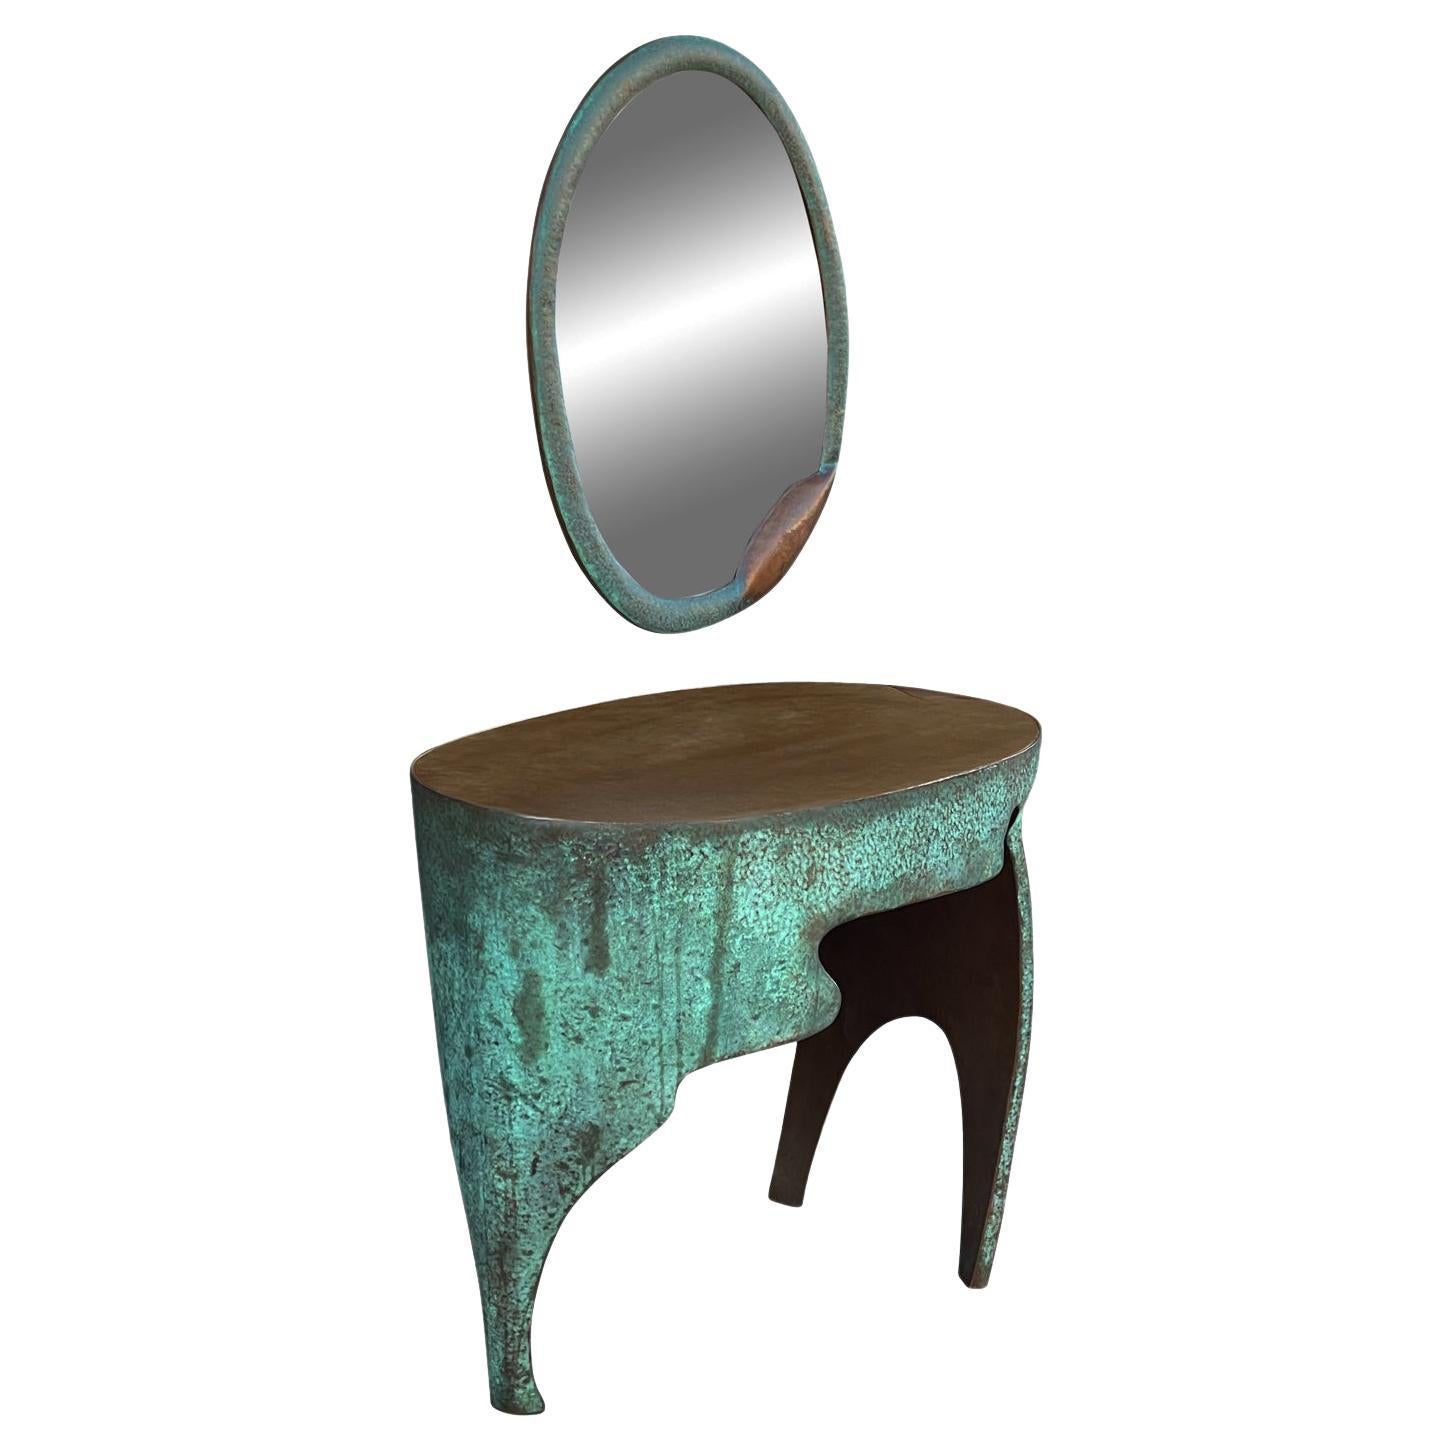 A sculptural desk made of textured verdigris copper and smooth copper. Beautiful warm patina throughout. Comes with matching accessory oval mirror. Artist made circa 1960's and one of a kind.